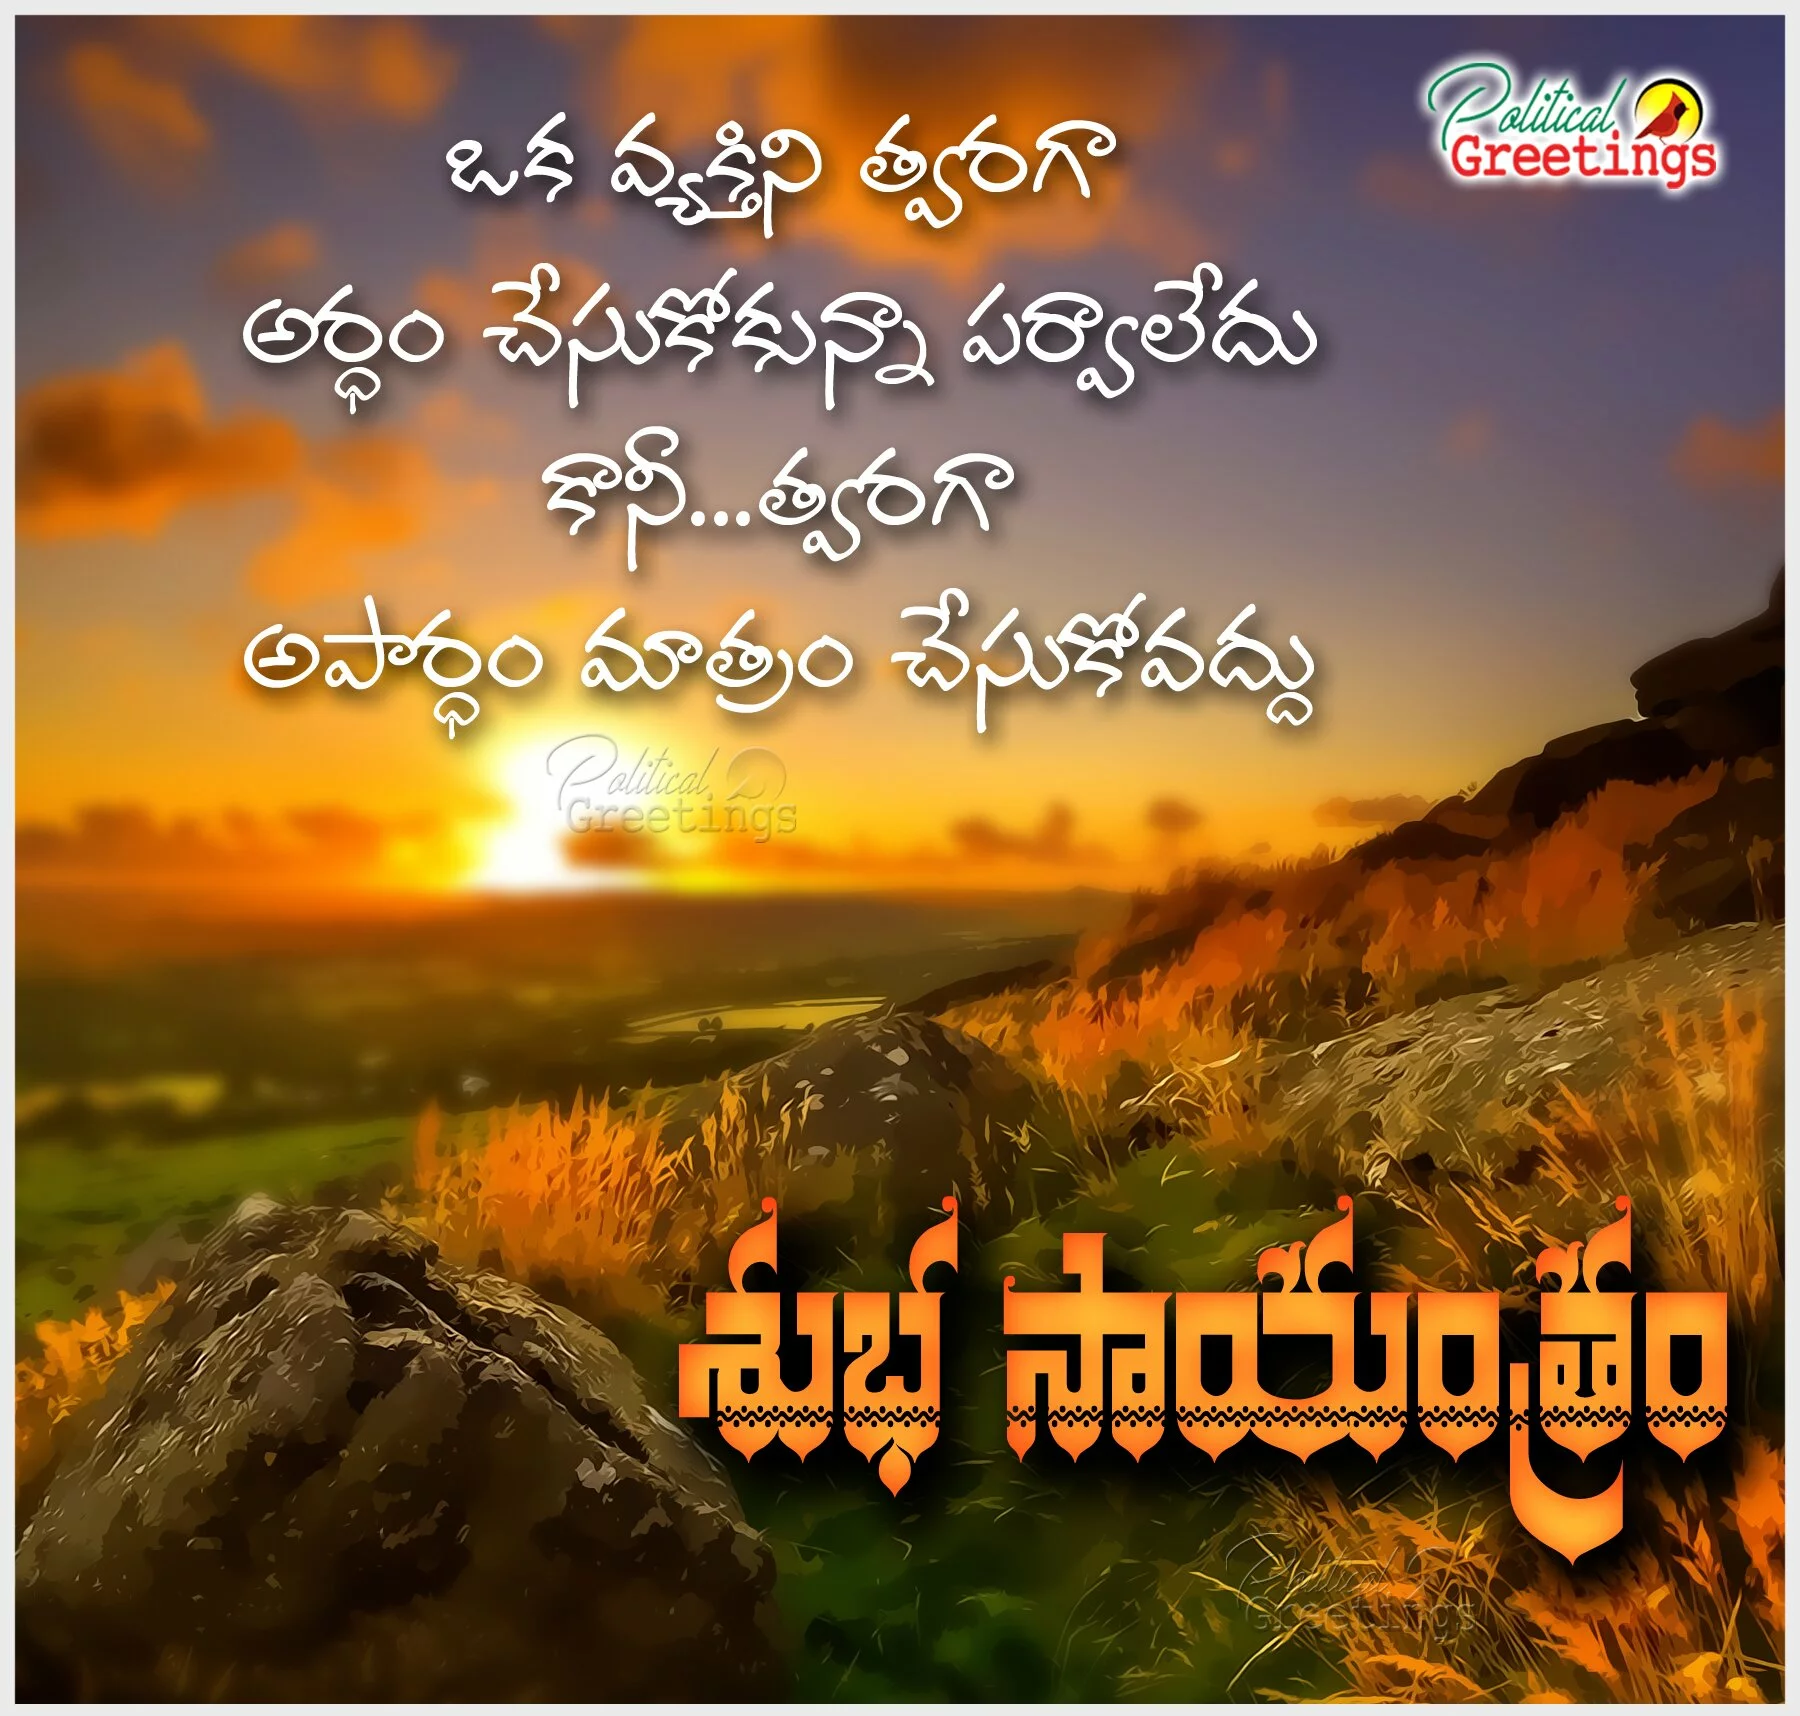 Good Evening Quotes in Telugu For Whatsapp wishes images